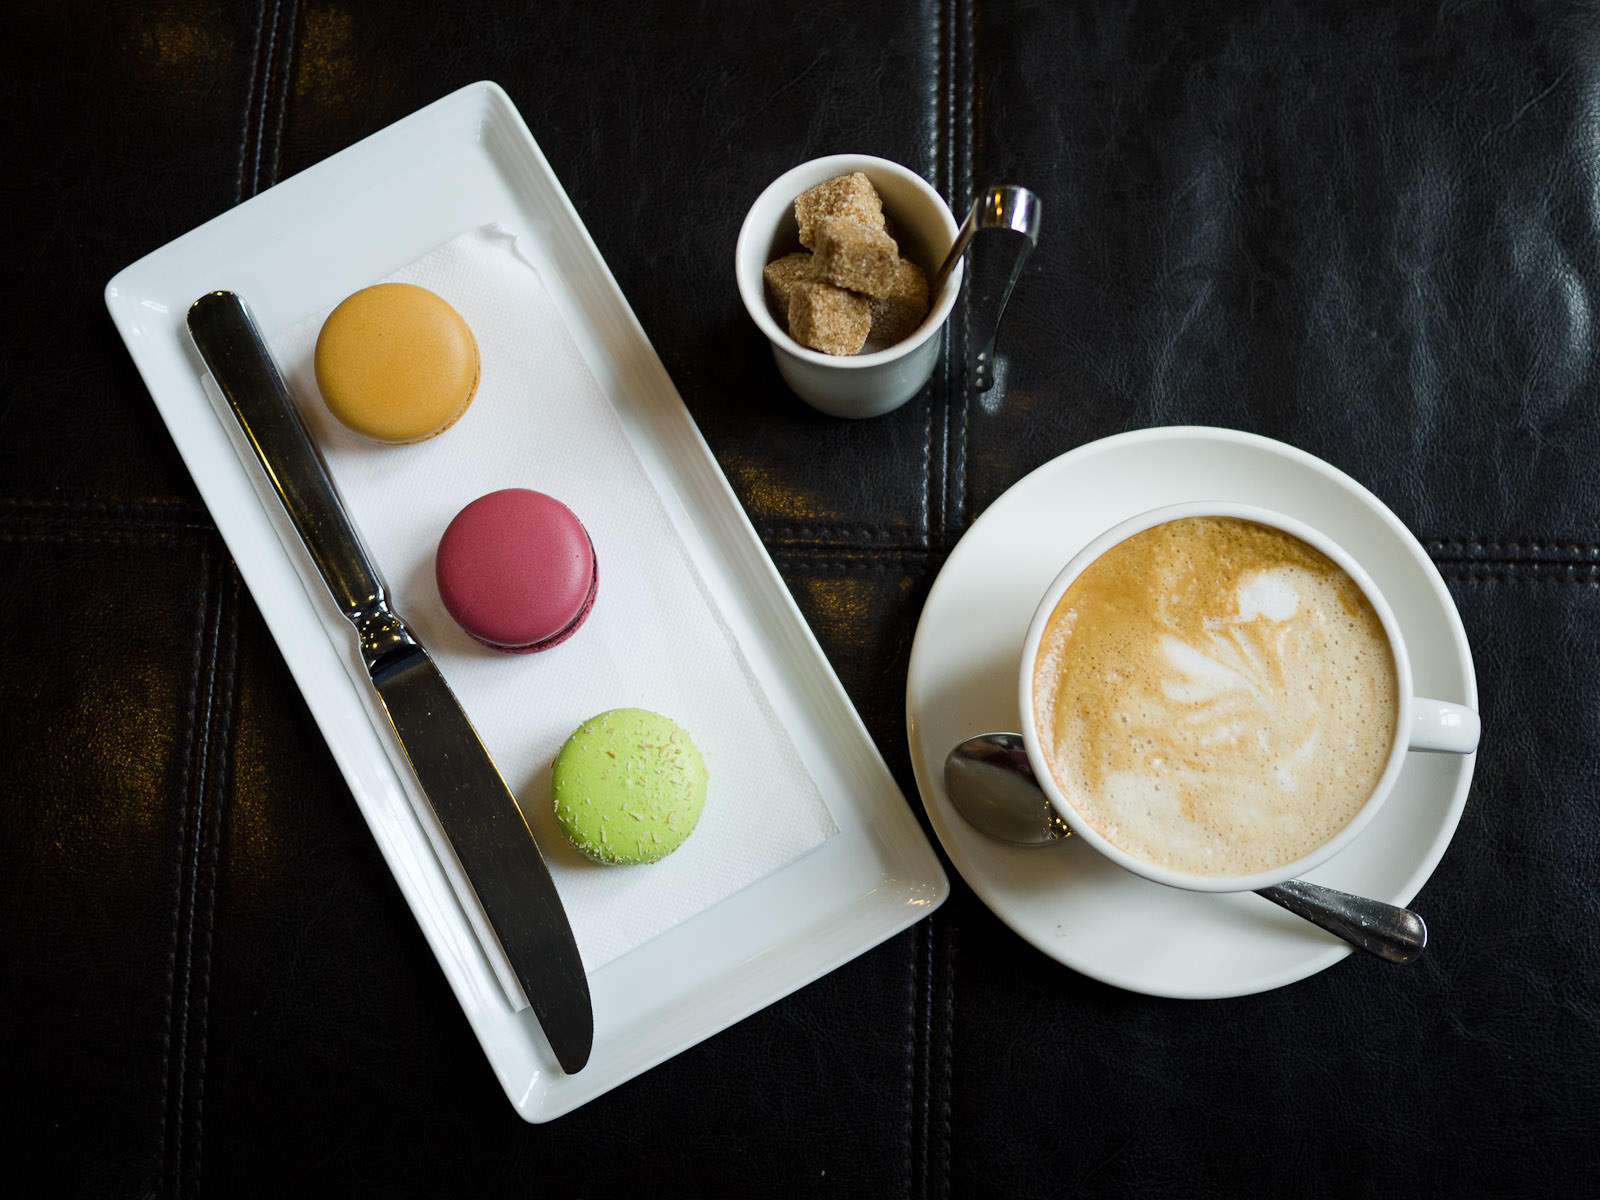 Salted caramel, blackcurrant and lime, mango and coconut macarons, soy flat white